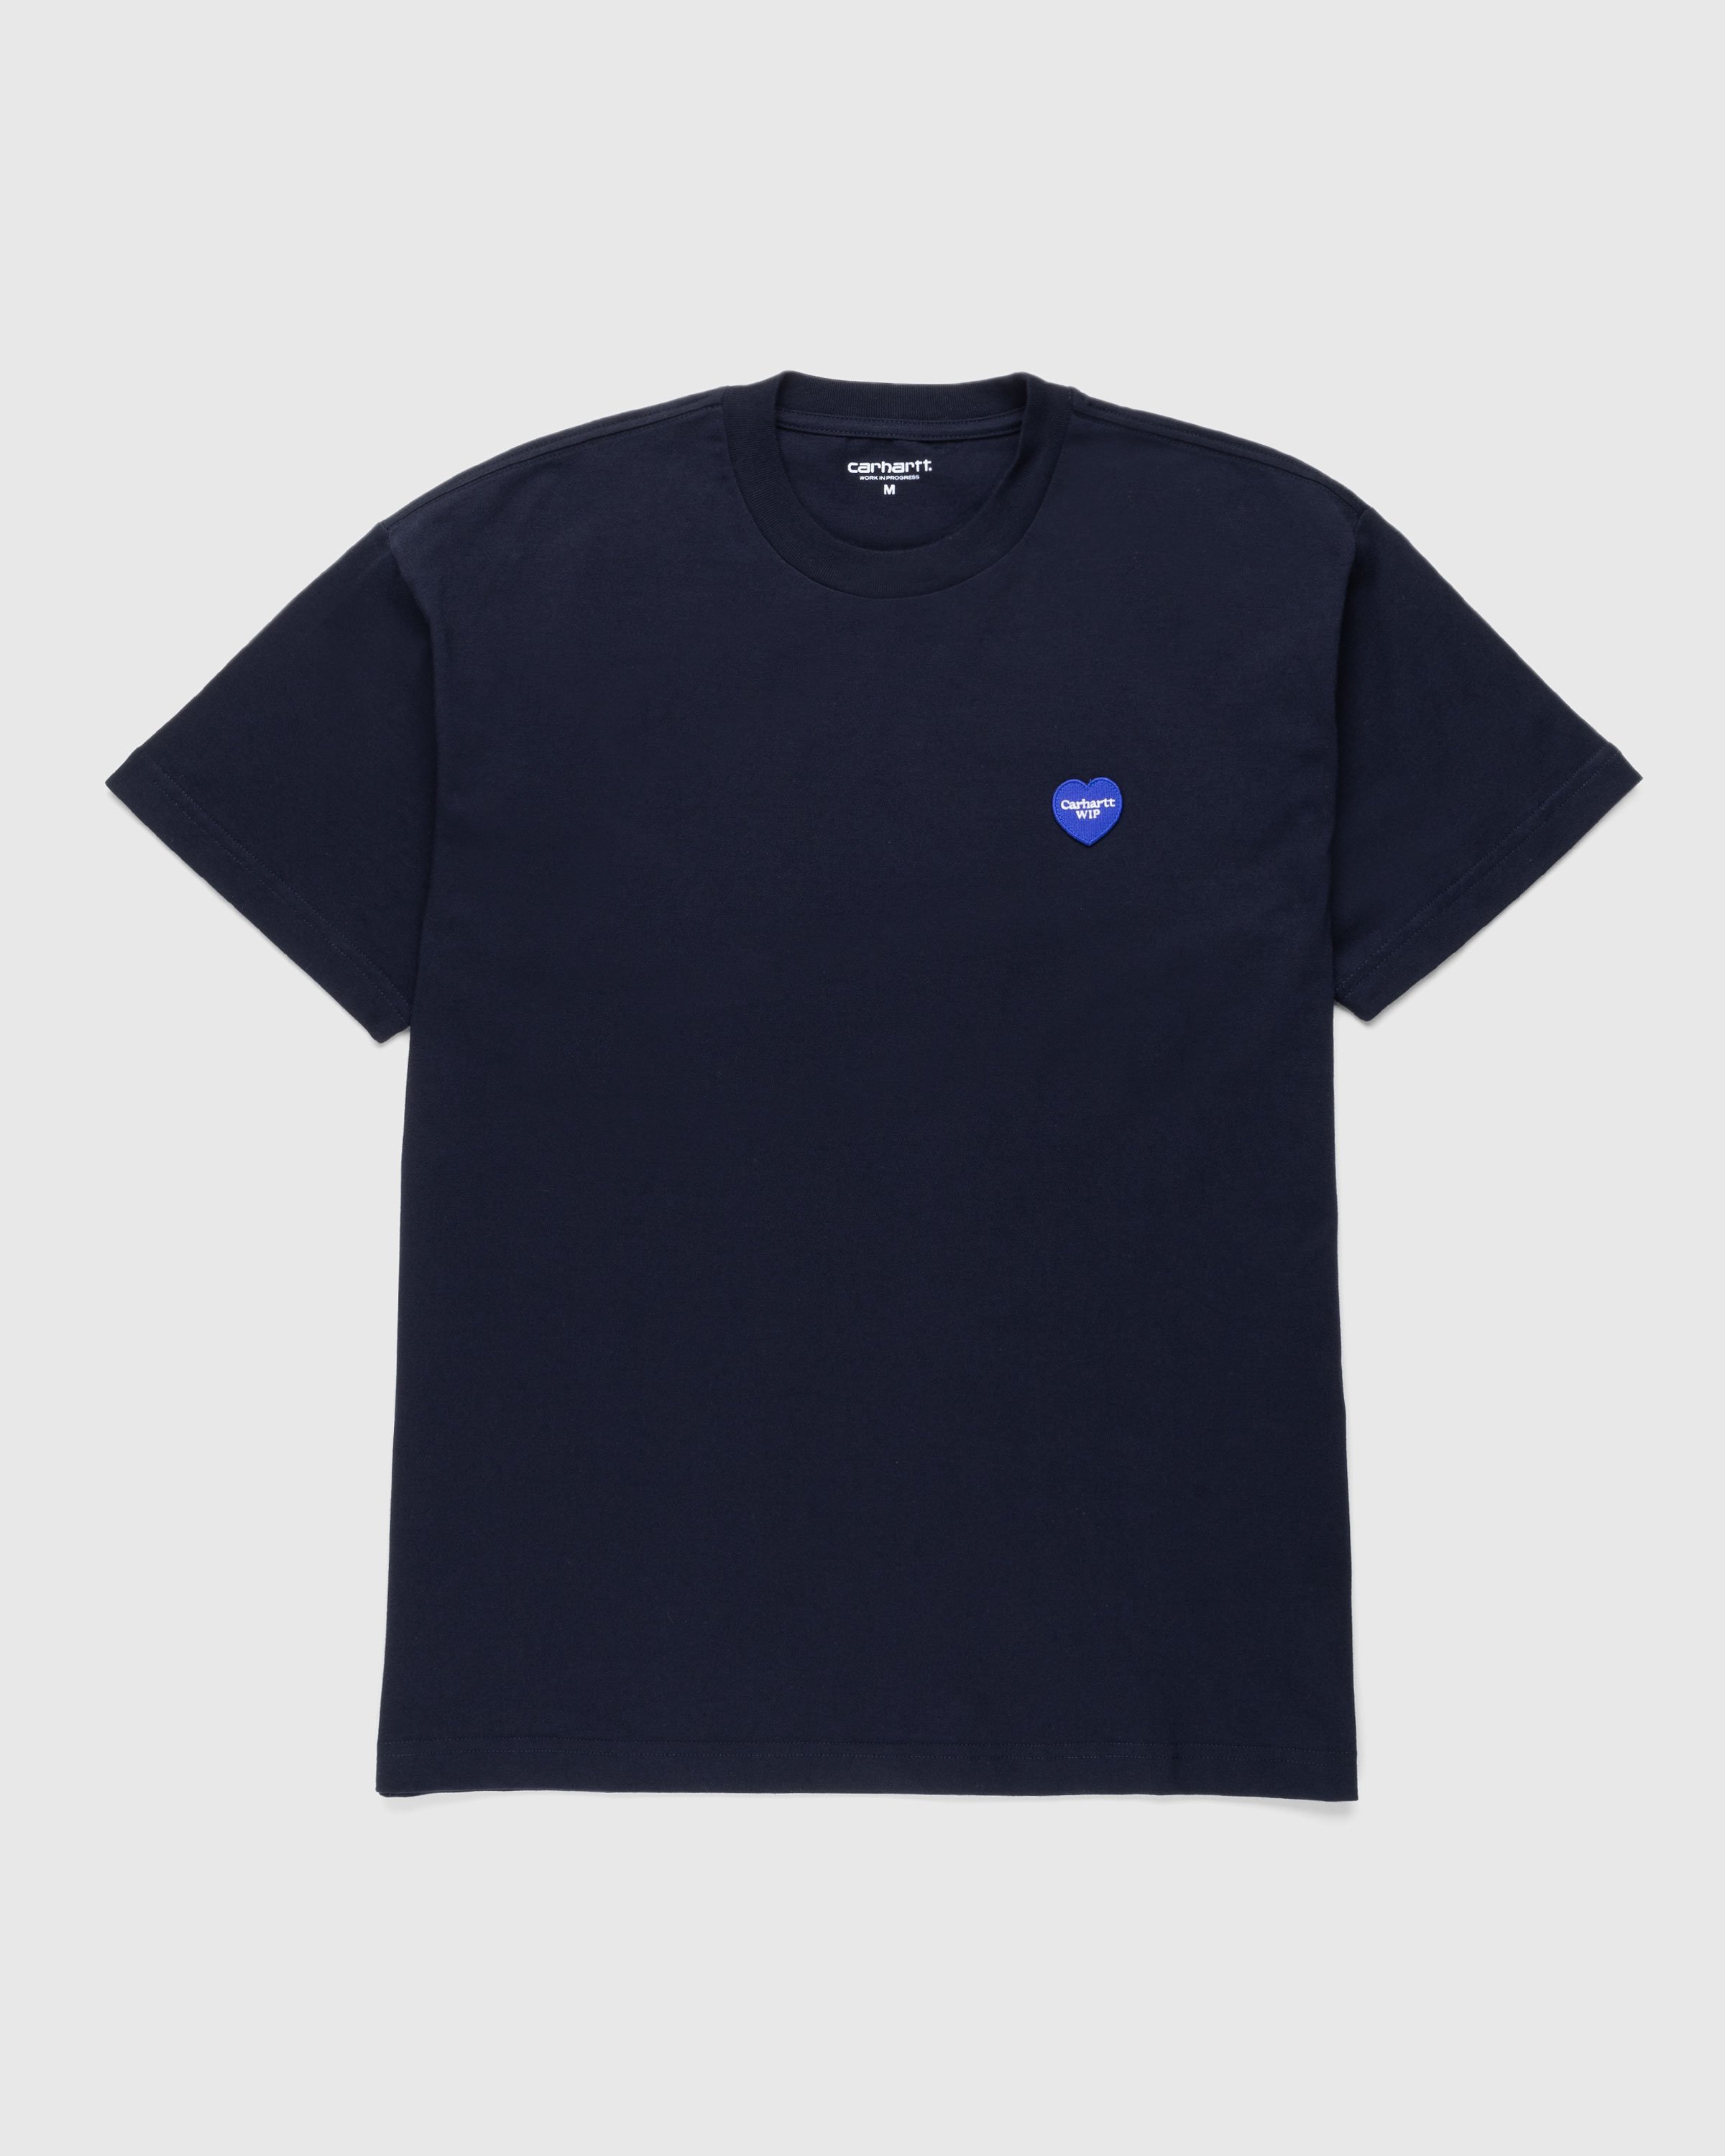 Carhartt WIP - S/S Heart Patch T-Shirt Blue - Clothing - Blue - Image 1